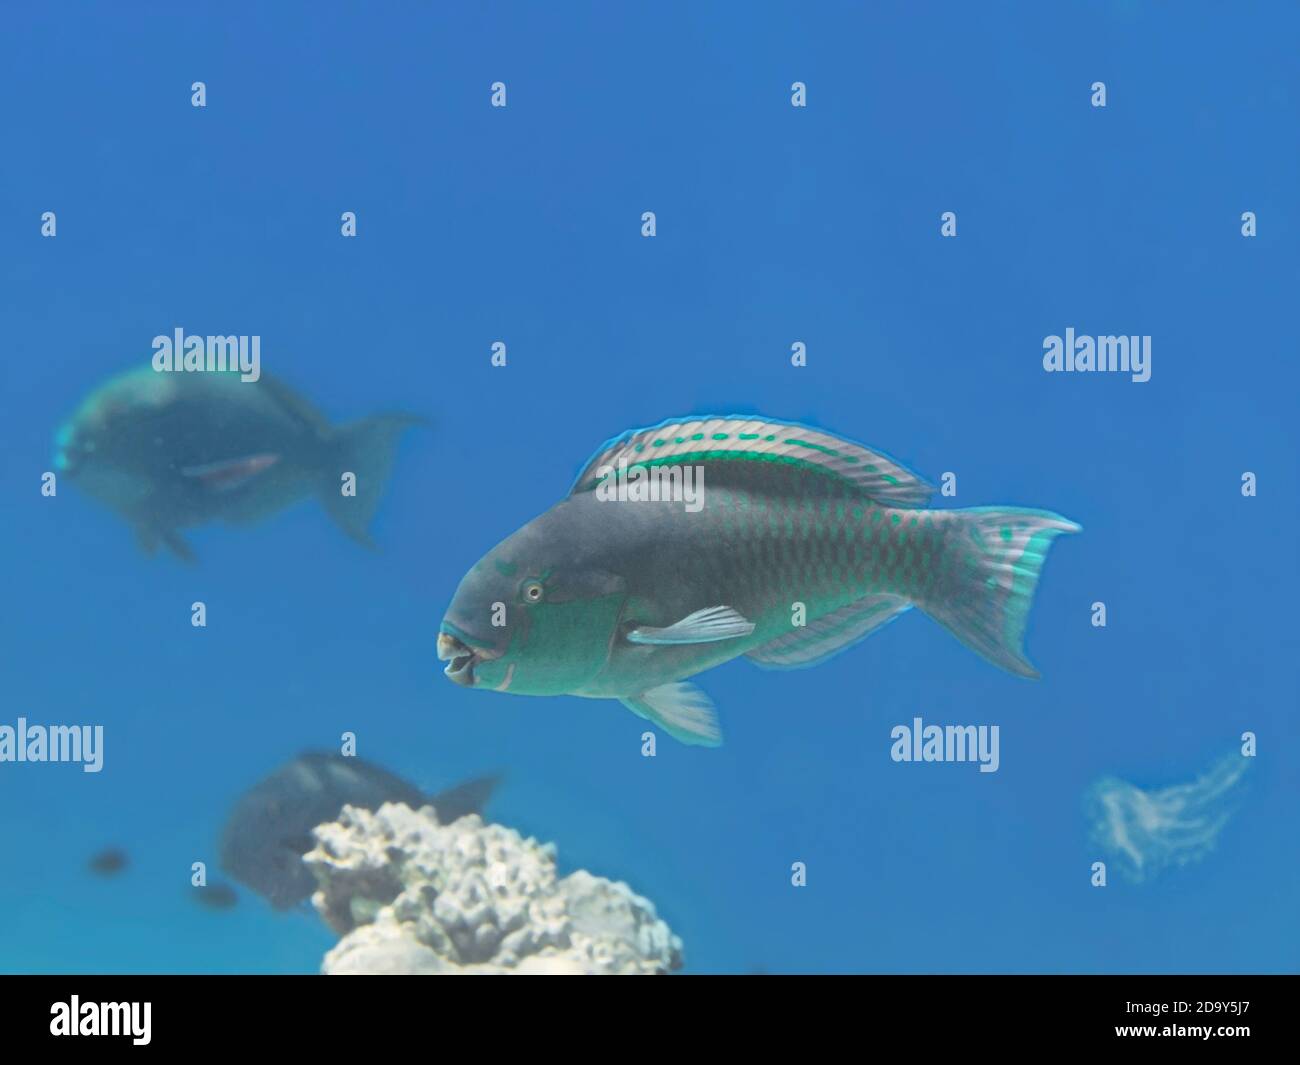 Bridled parrotfish fish in water near coral reef in tropical sea Stock Photo